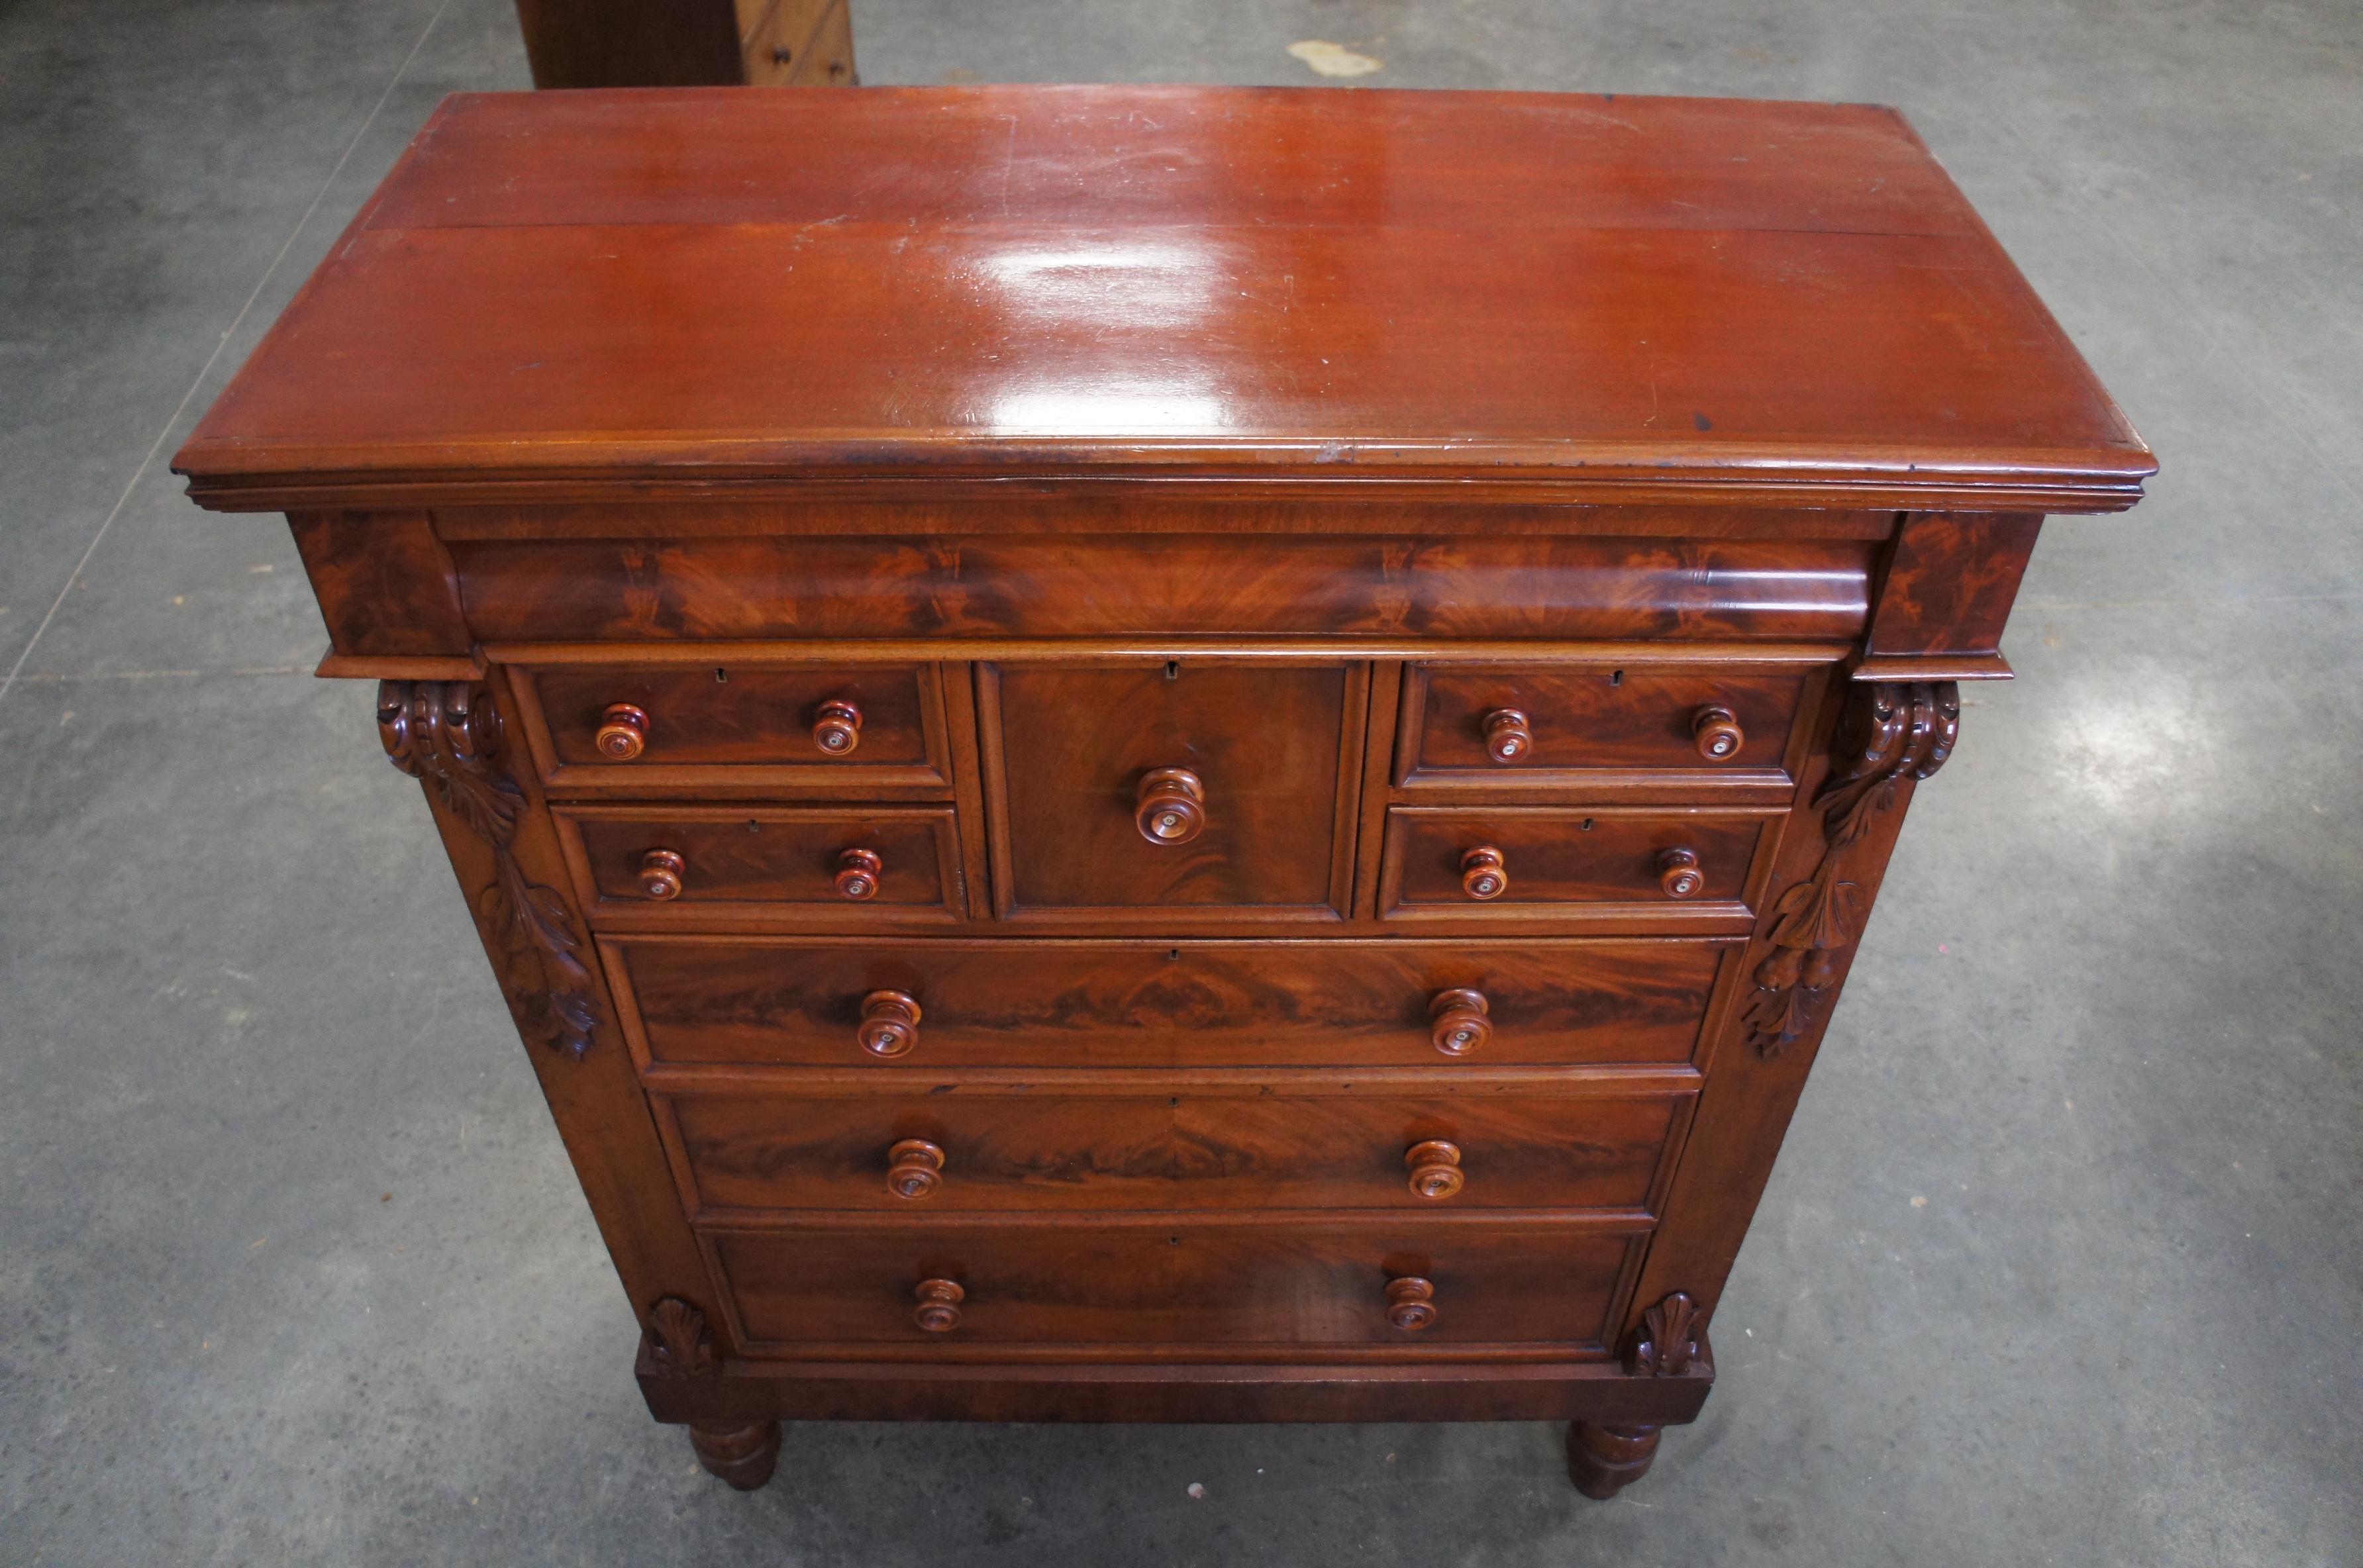 Scottish Flamed Mahogany Antique 1850s Empire Highboy Dresser Chest of Drawers 1